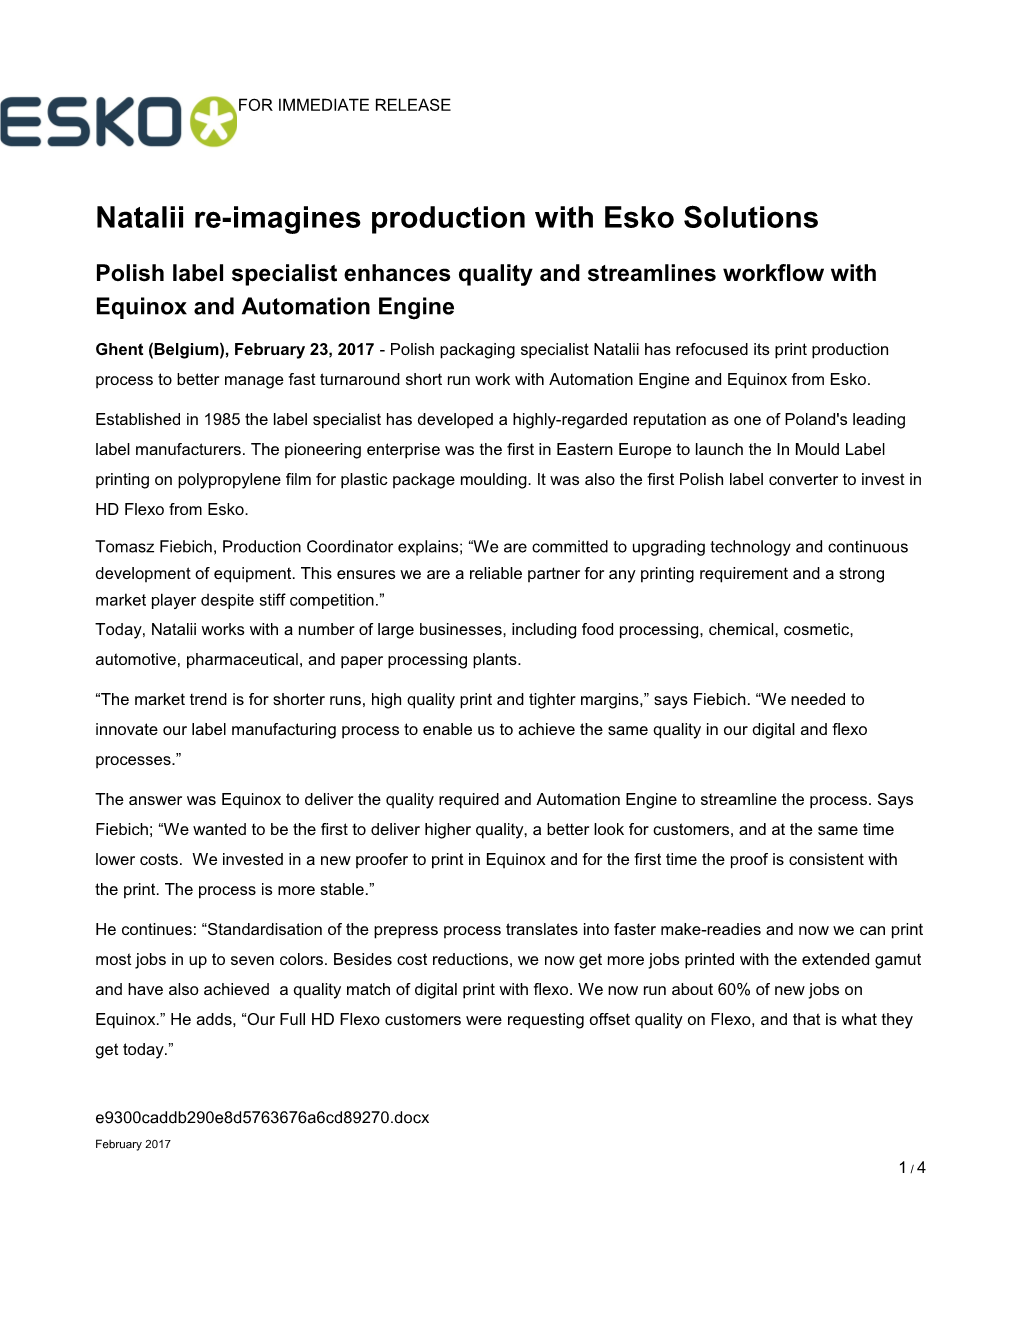 Natalii Re-Imagines Production with Esko Solutions